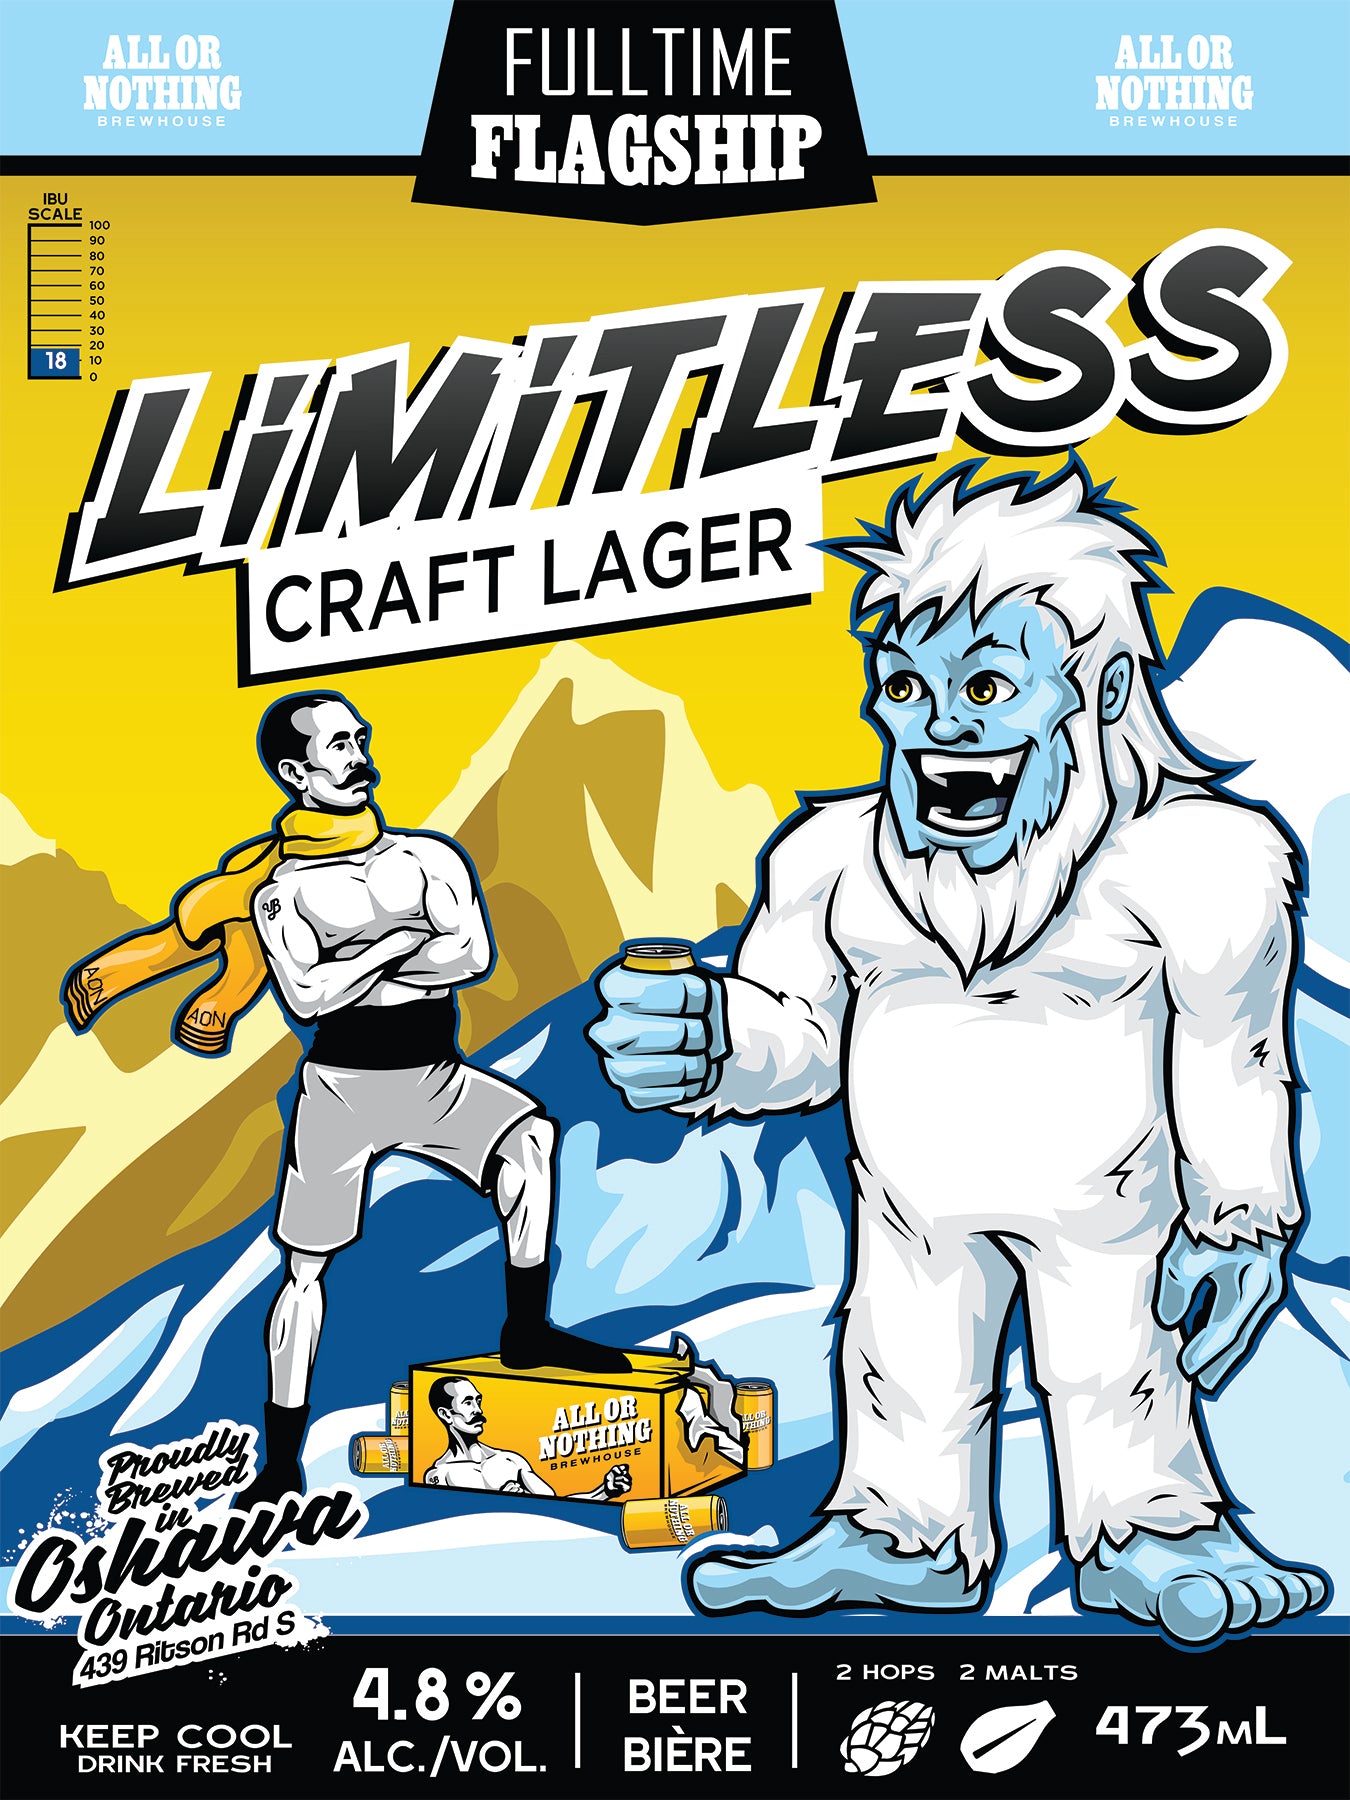 Limitless Craft Lager